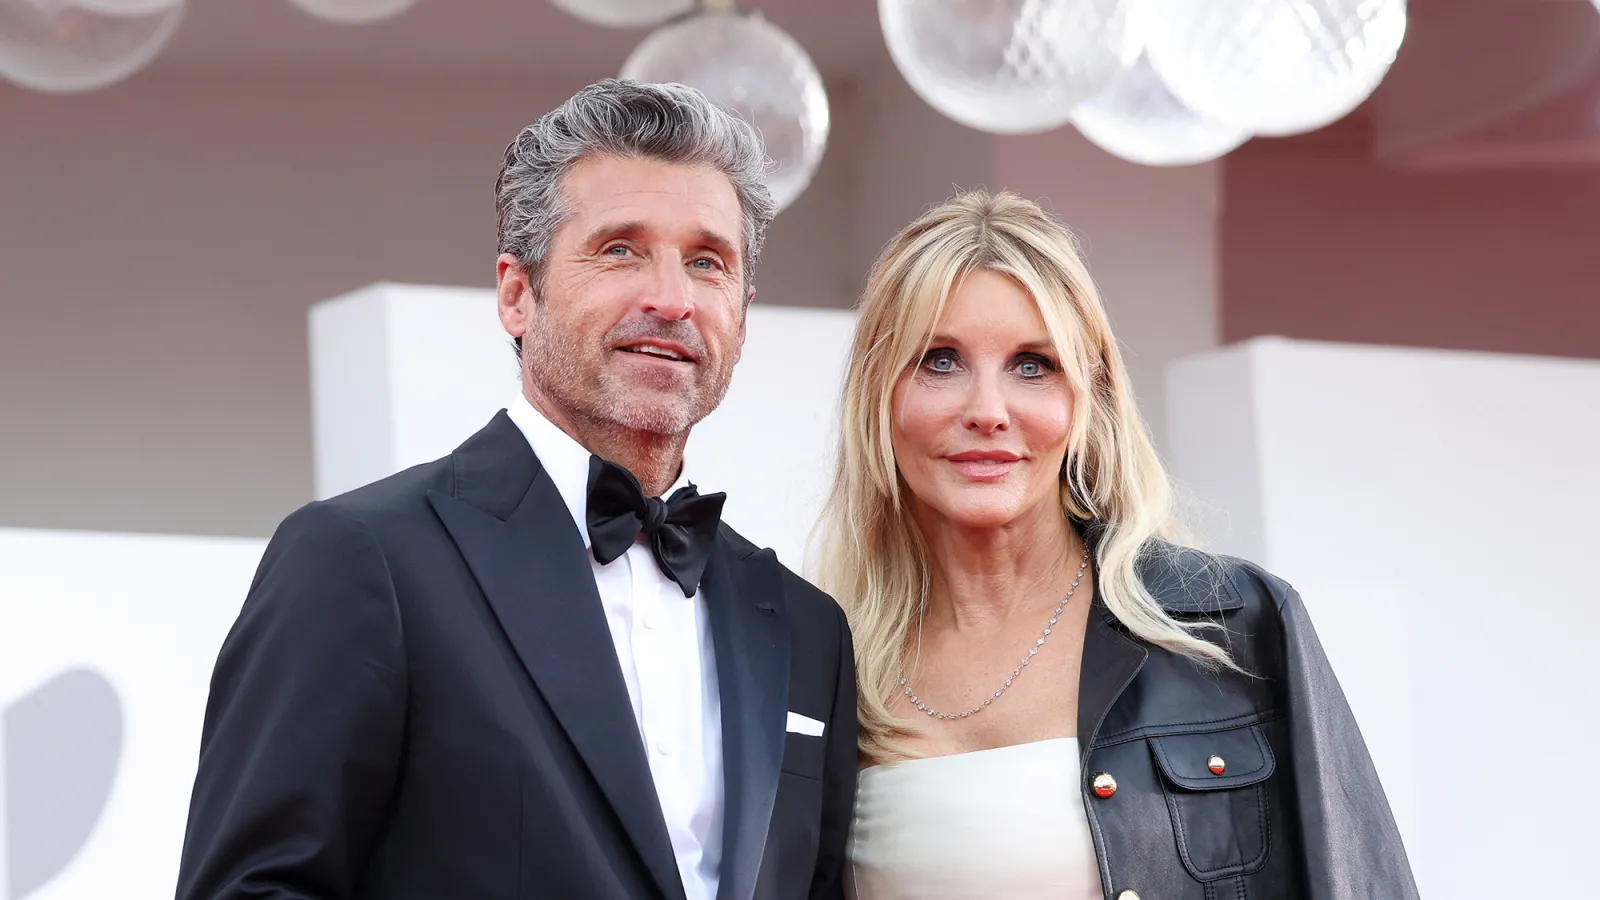 Patrick Dempsey And Wife Jillians Relationship Timeline Feature.jpg